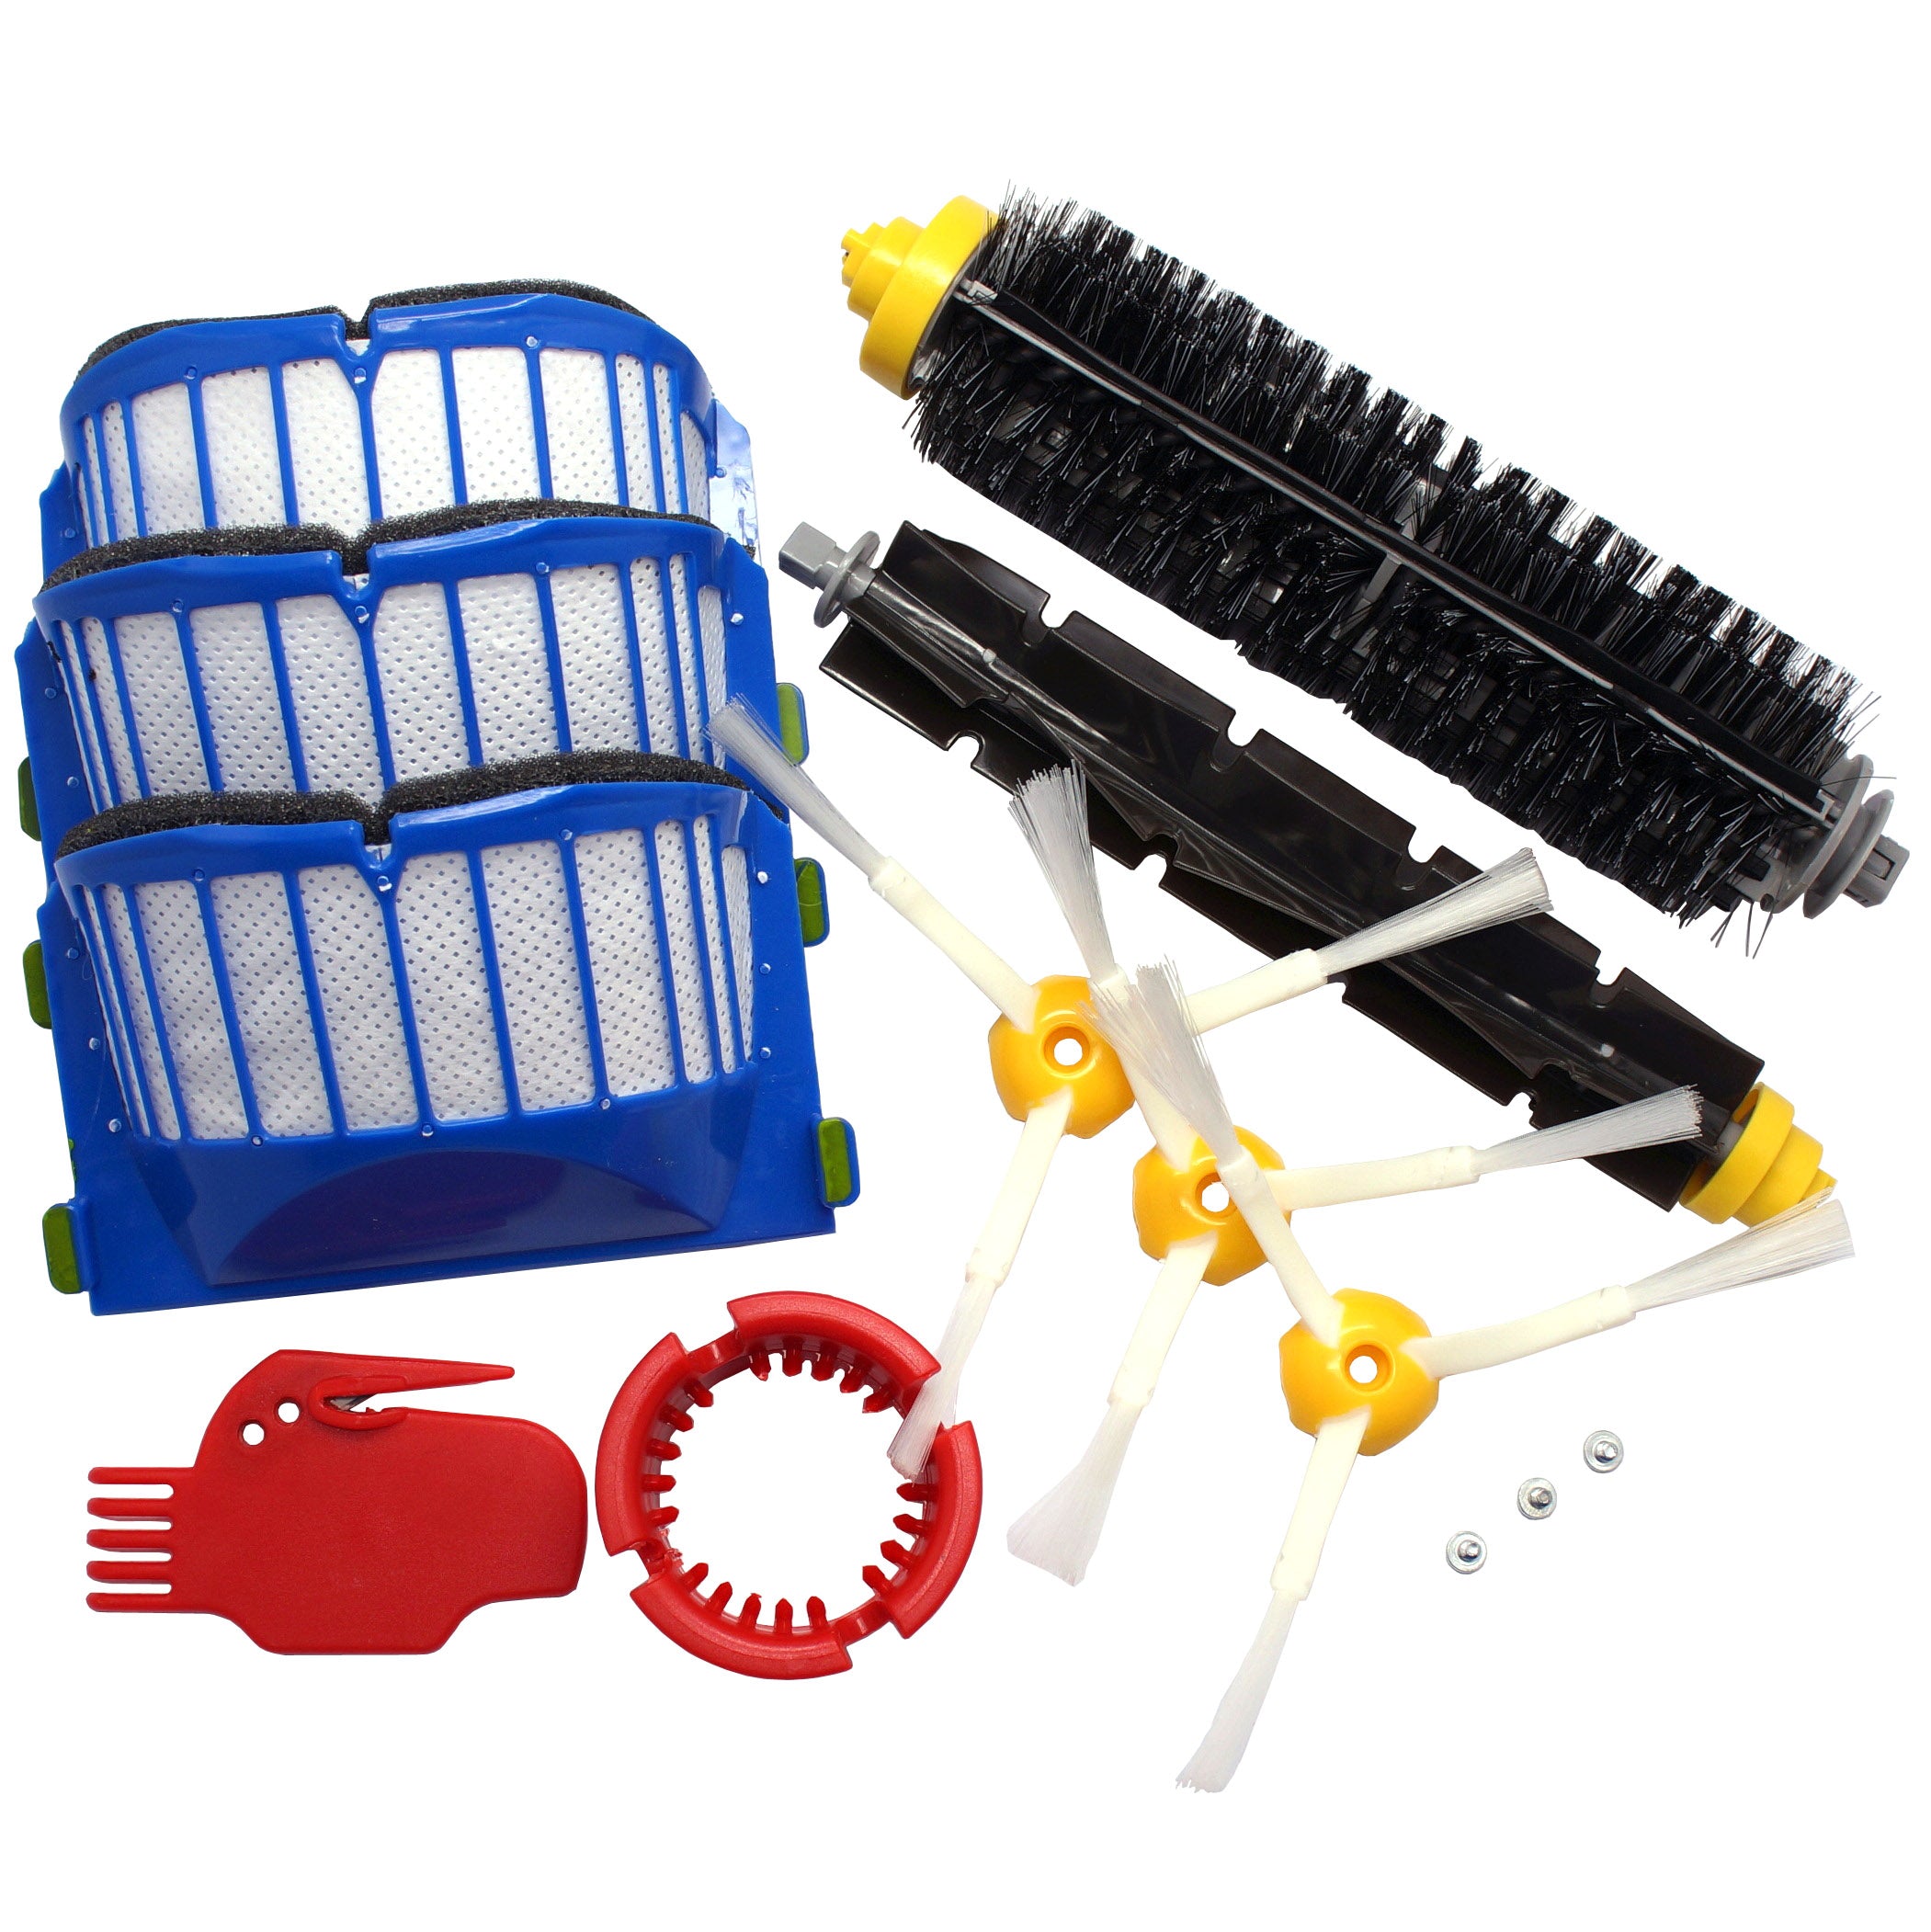 Replacement Parts Kit For iRobot Roomba 600 Series Vacuum Filter